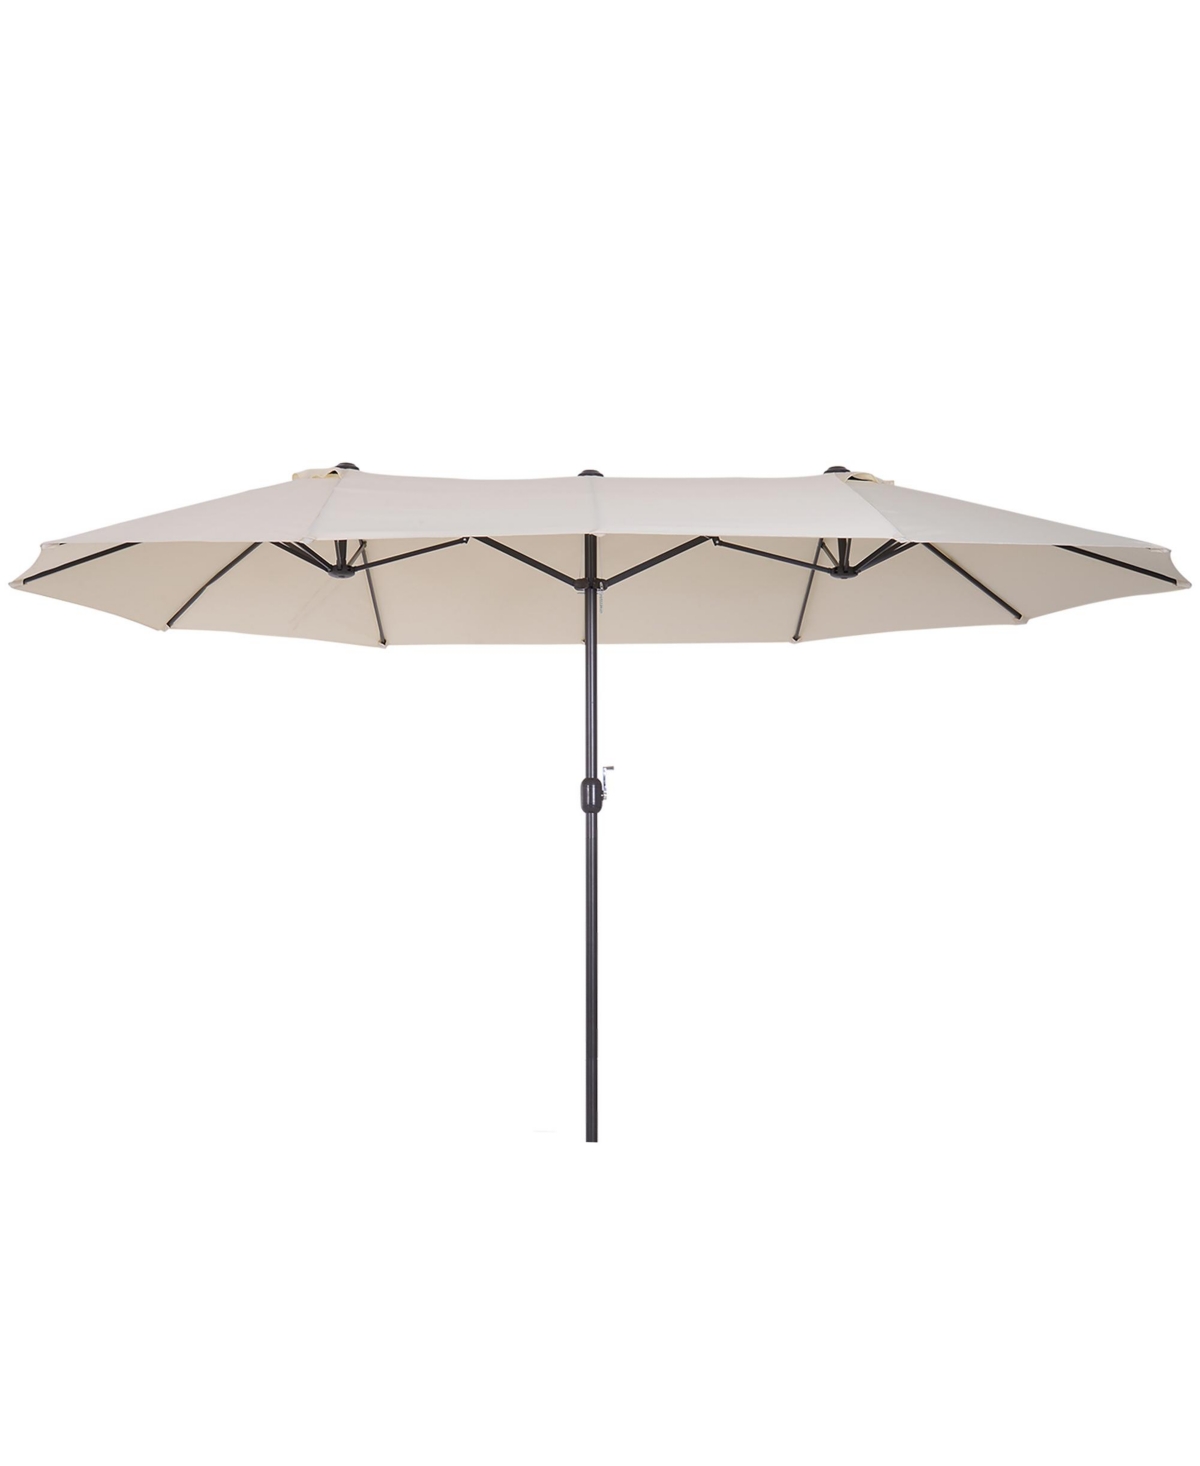 15ft Patio Umbrella Double-Sided Outdoor Market Extra Large Umbrella with Crank Handle for Deck, Lawn, Backyard and Pool, White - White